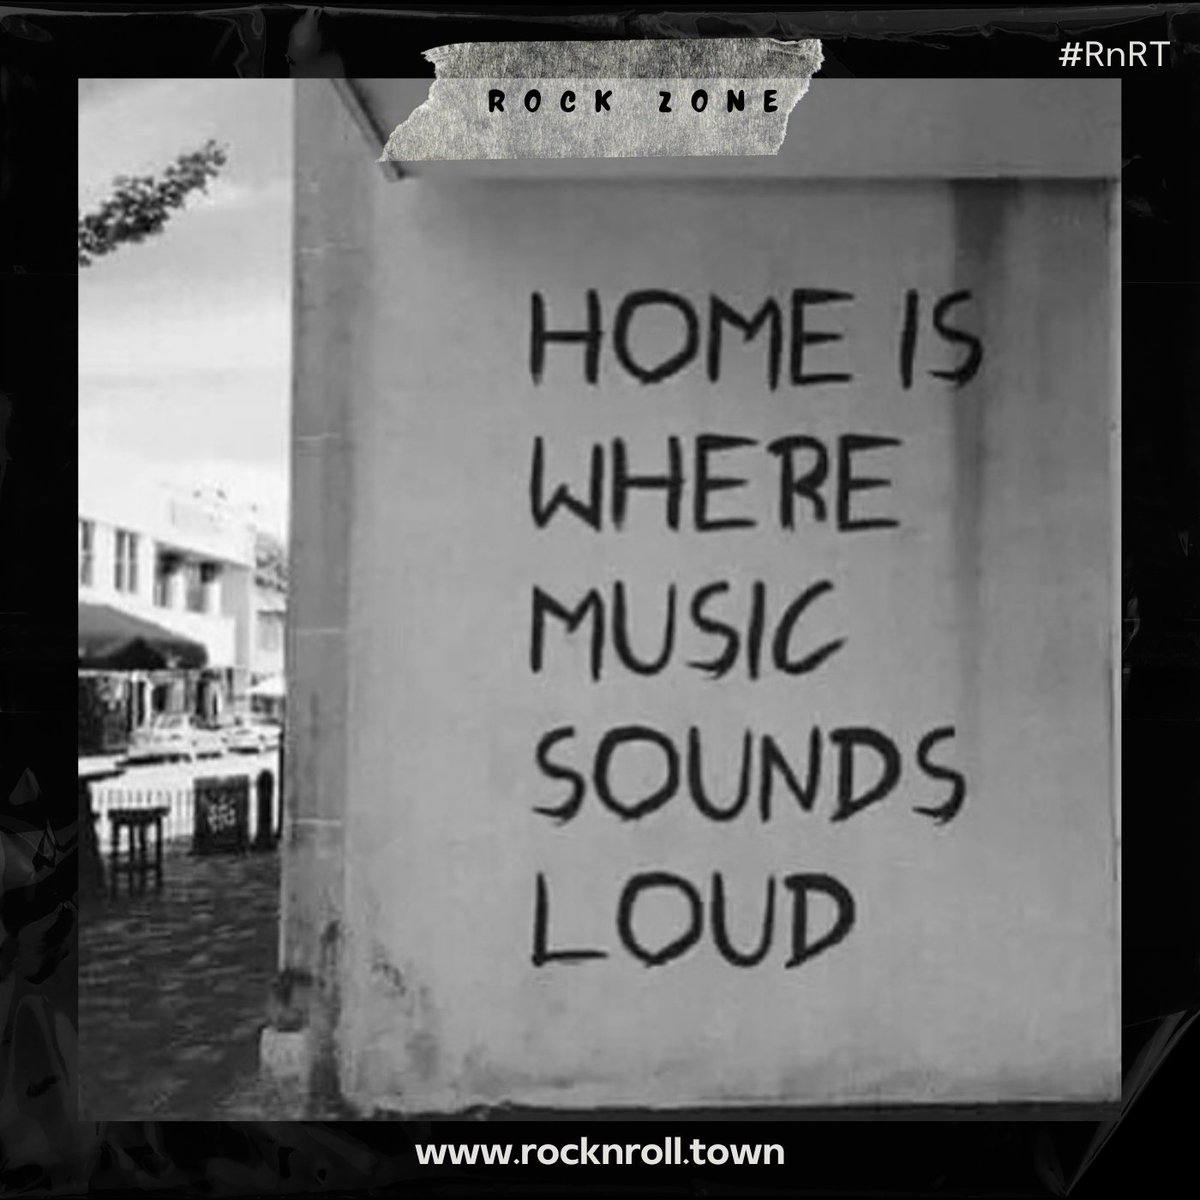 🤘🏻 #RockZone 🤘🏻

Home Is Where Music Sounds Loud

#RnRT #RockNRollTown #Towners #RockNRollQuotes #RockQuotes #MetalQuotes #MusicQuotes #Rock #Metal #RockNRollMusic #RockMusic #MetalMusic #Music #RockNews #MetalNews #RockSiteGreece #MetalSiteGreece #RockSite #MetalSite